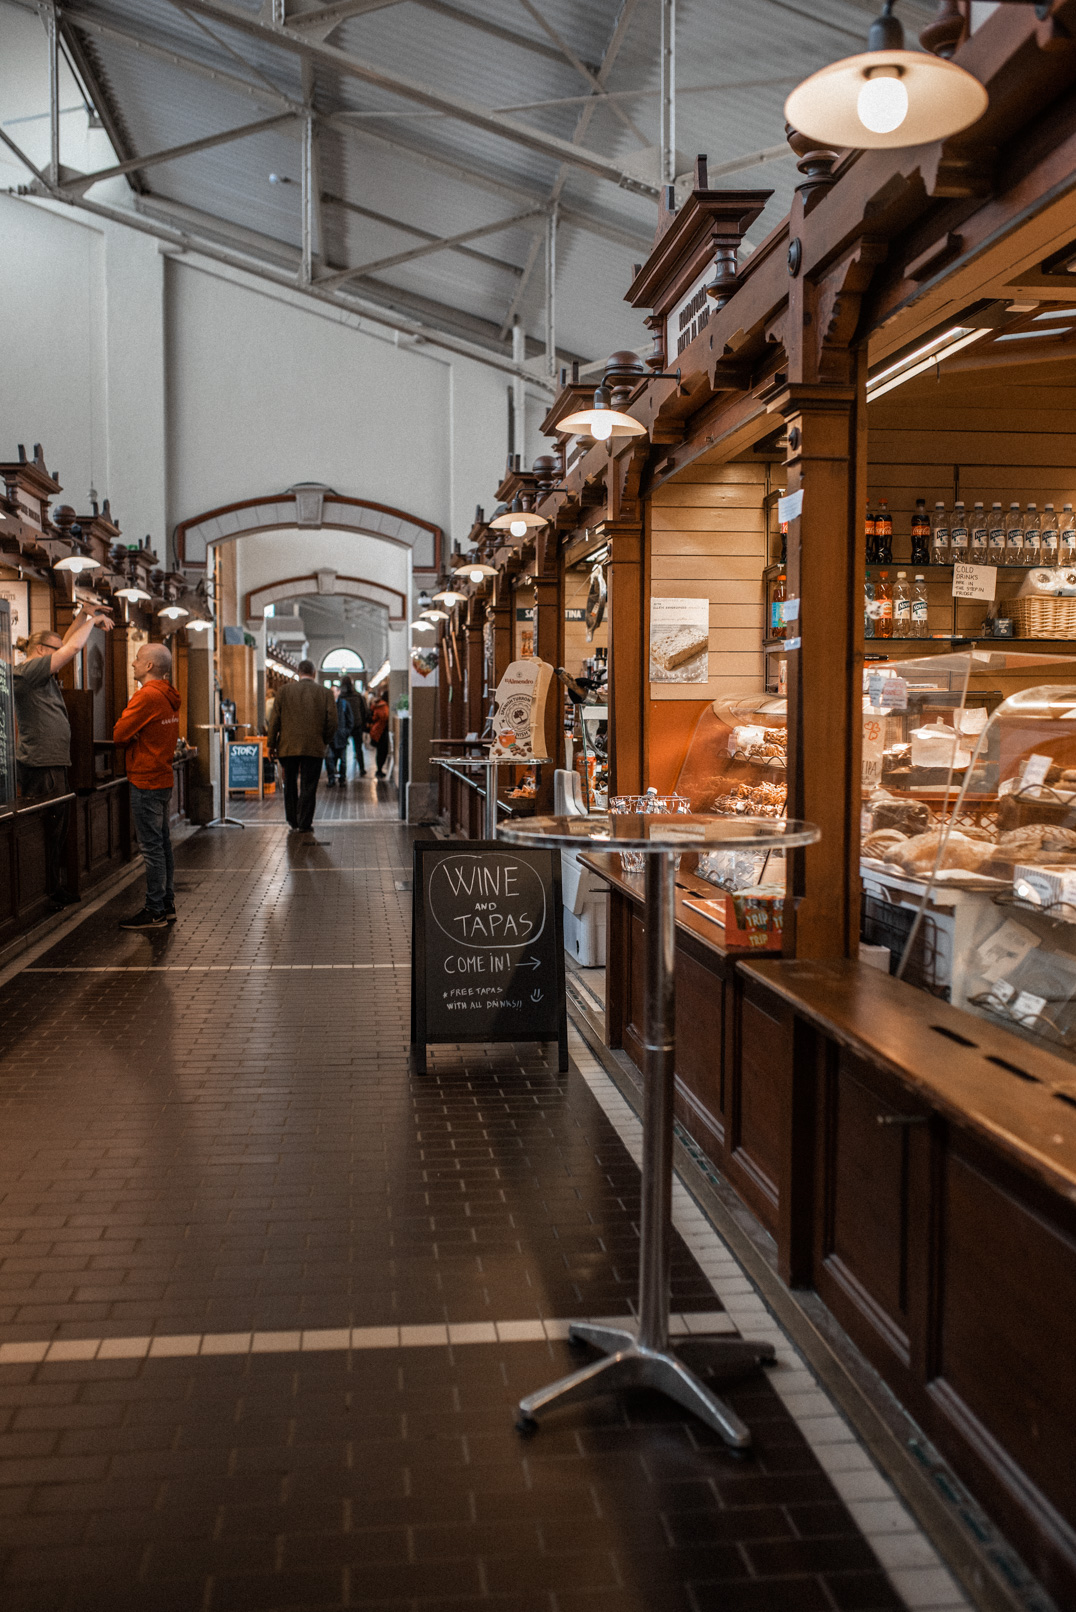 One day in Helsinki - Inside the old market hall